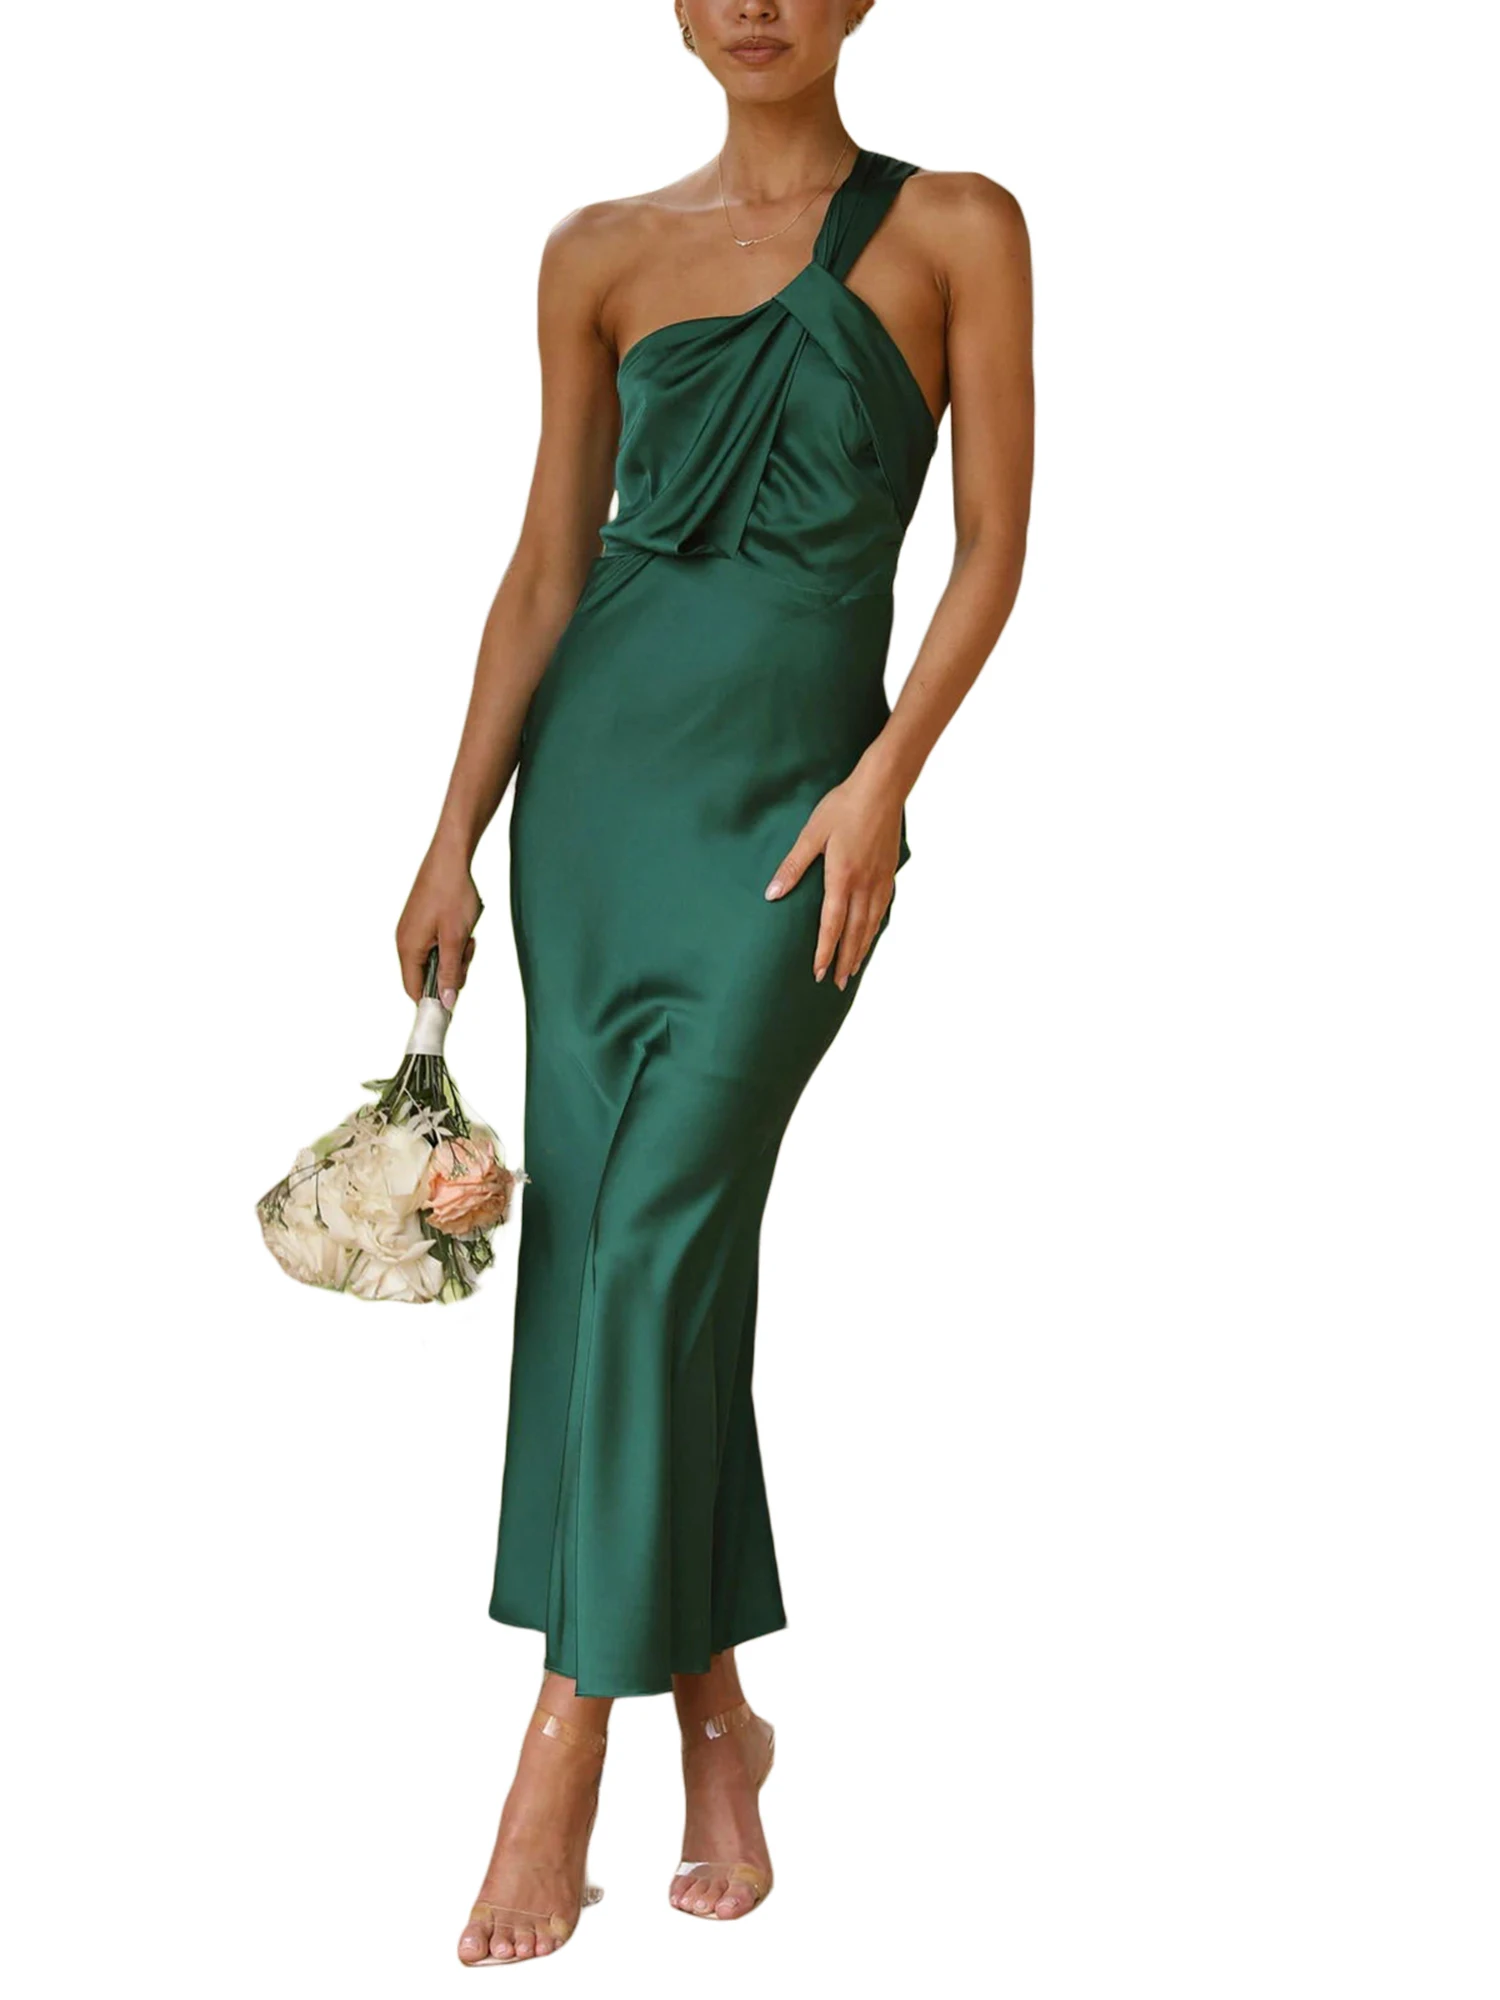 

Elegant Off-Shoulder Ruffle Maxi Dress with High Slit V-Neckline and Sleeveless Design - Perfect for Evening Parties and